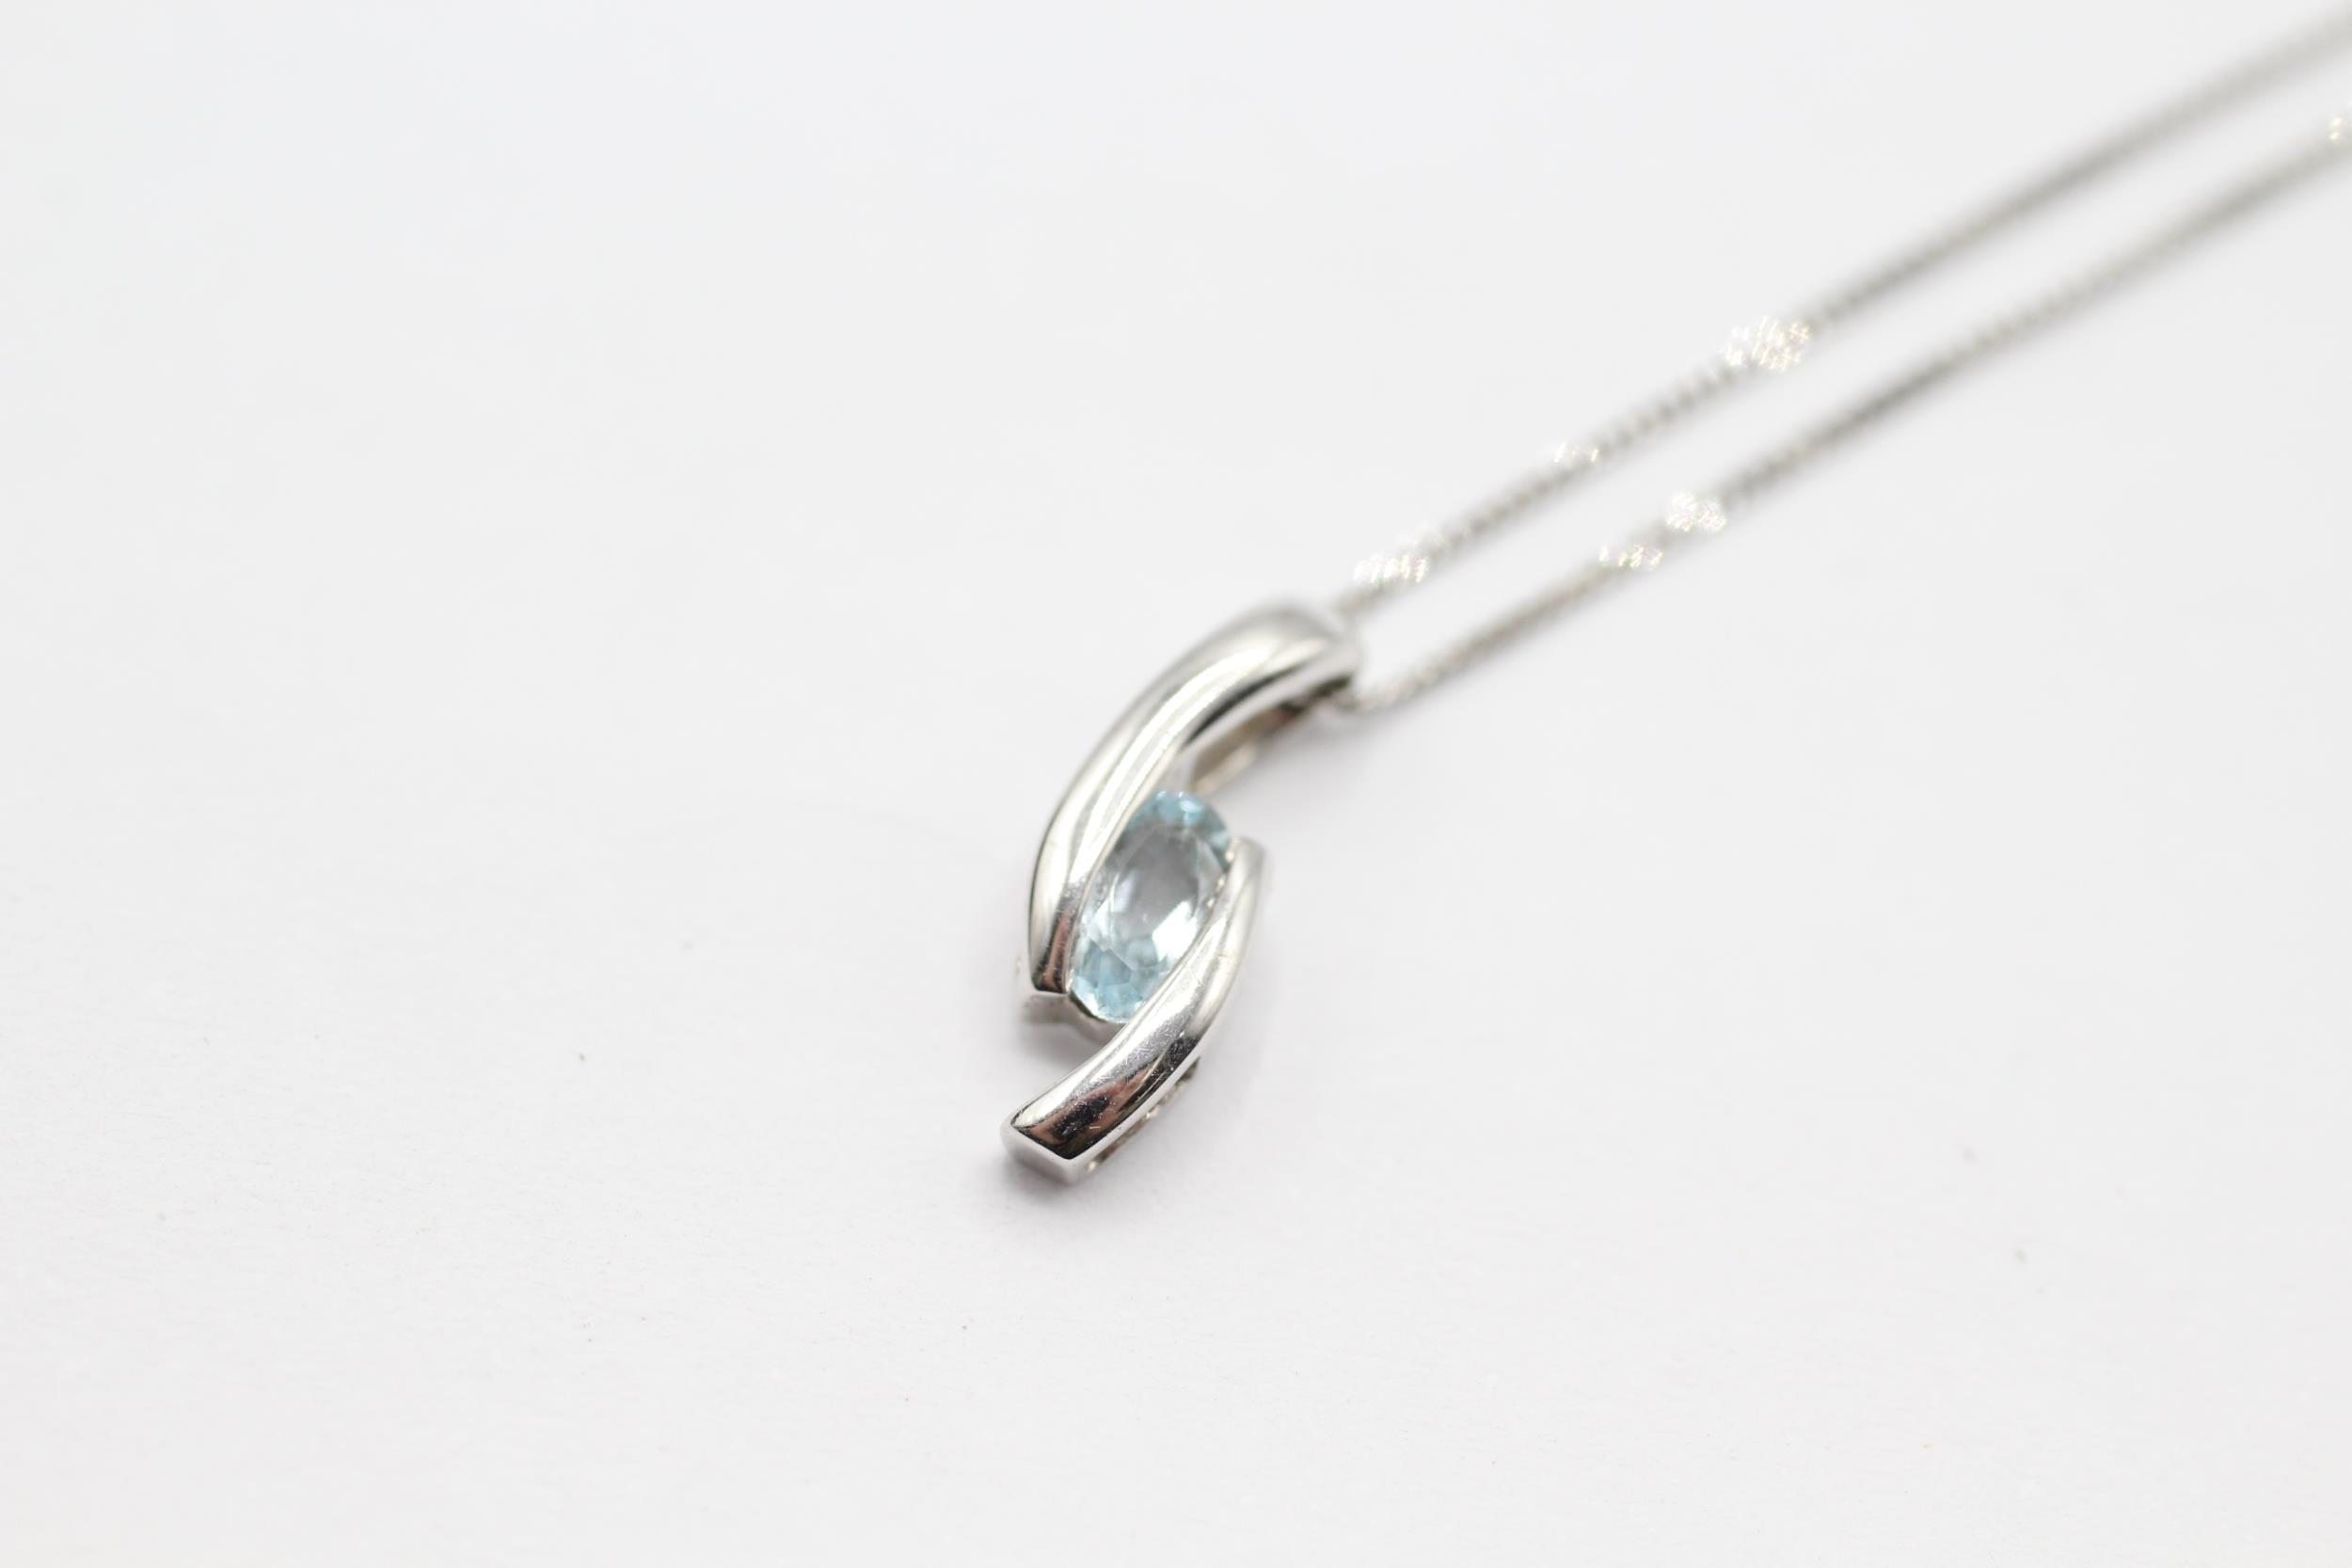 9ct white gold blue topaz pendant necklace - 1.4 g - Image 2 of 4